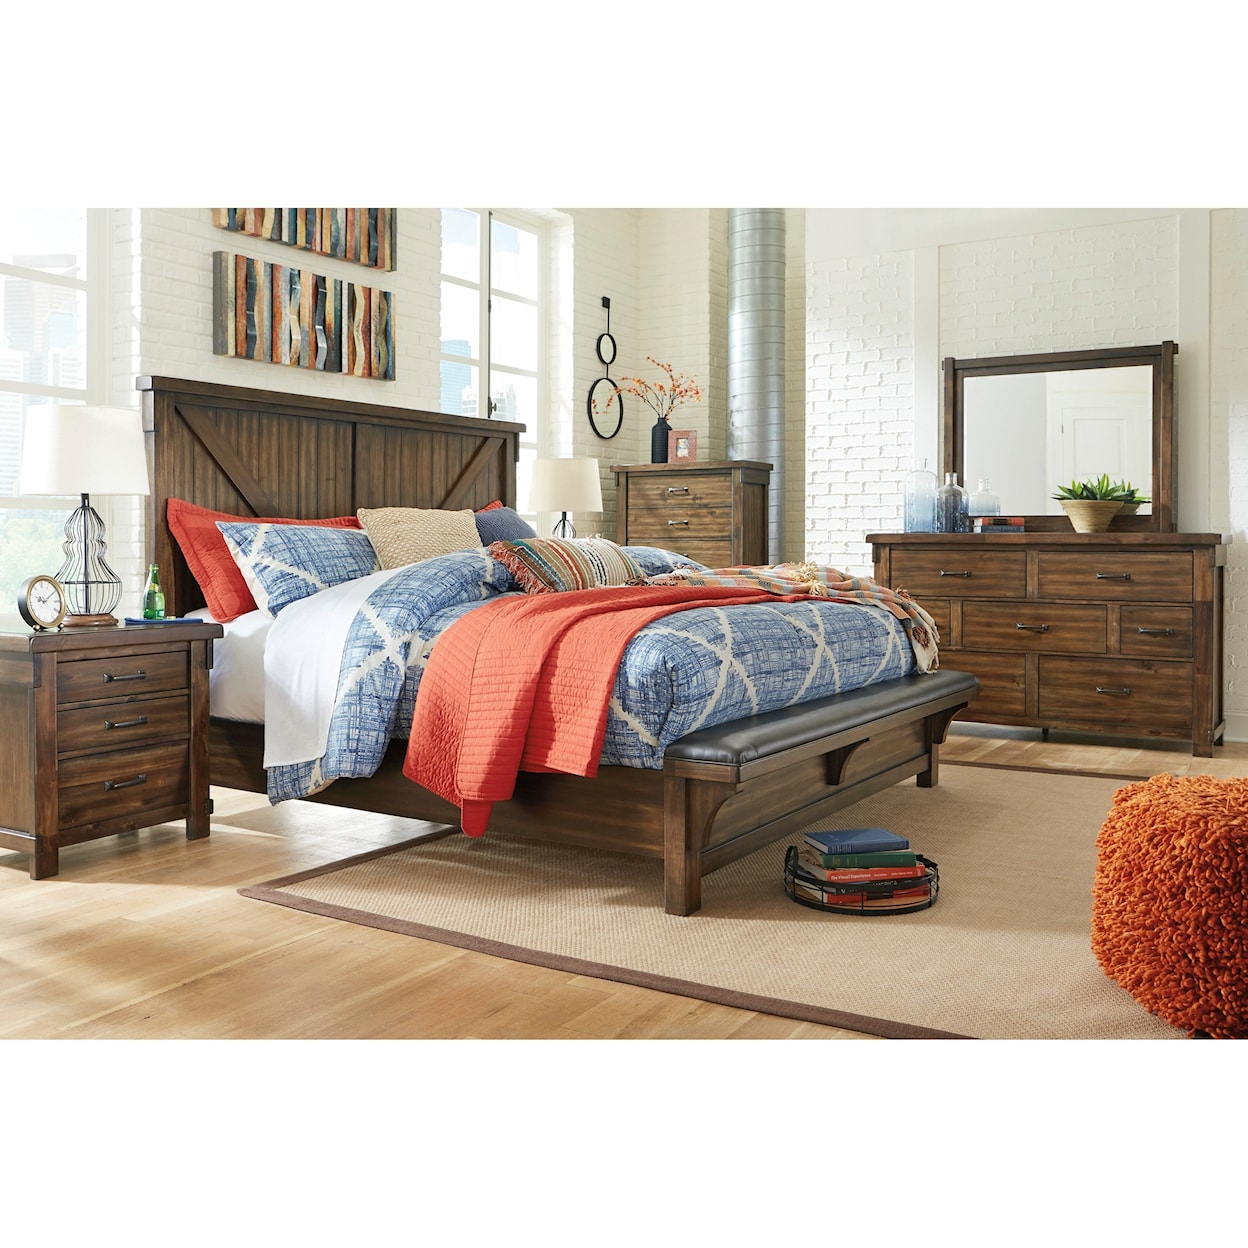 Signature Design by Ashley Lakeleigh California King Bedroom Group